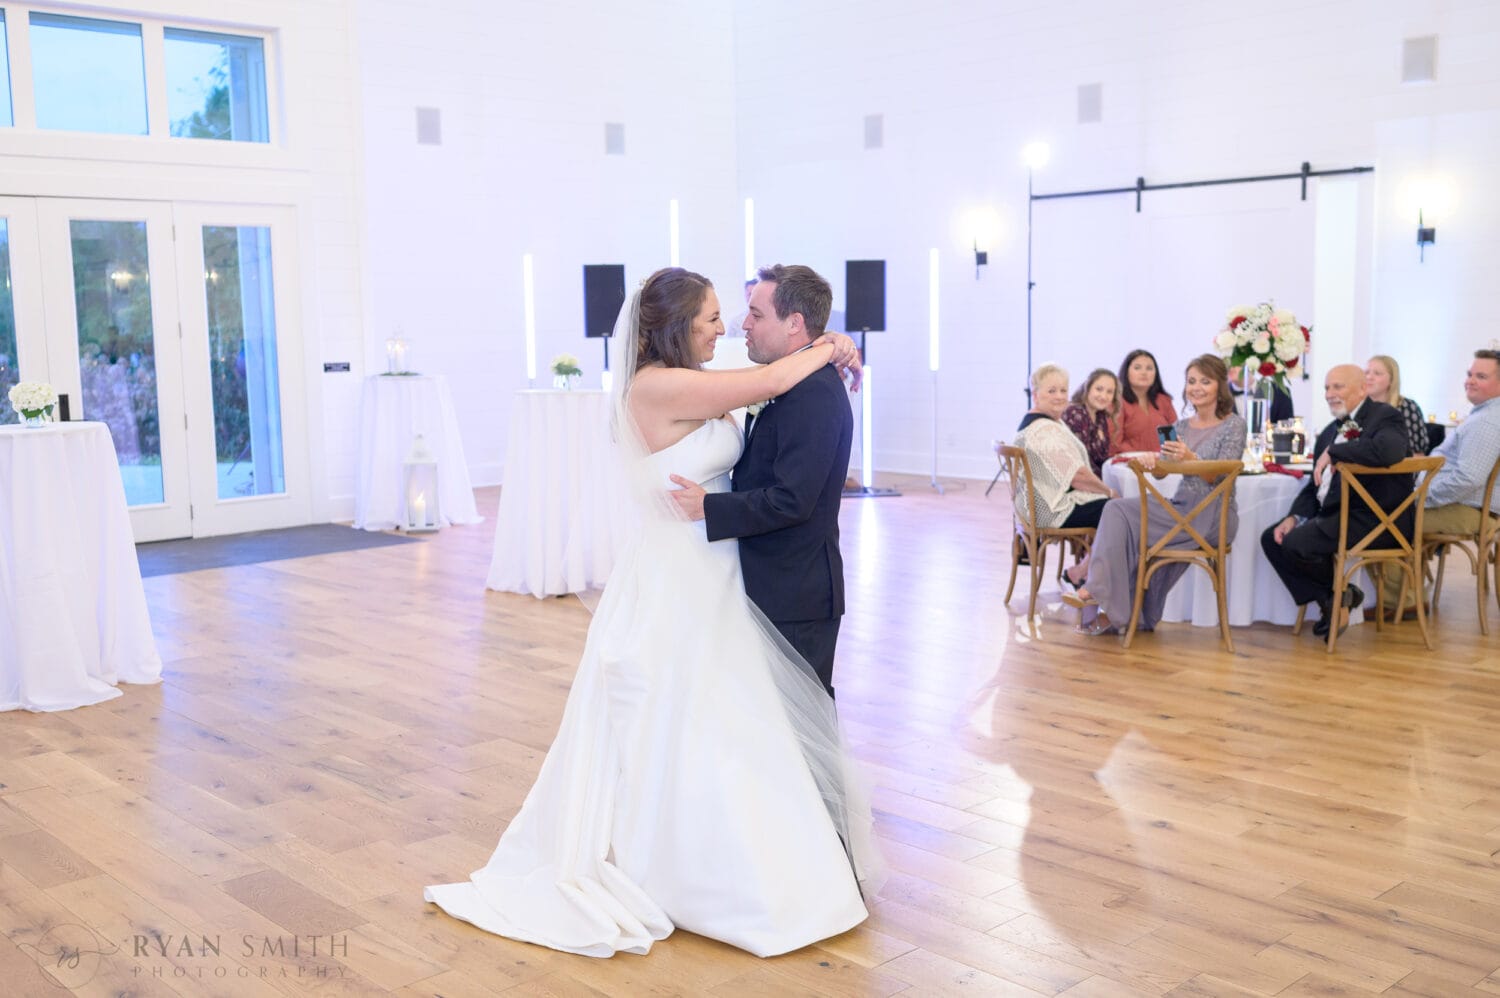 Happiness during the first dance - The Venue at White Oaks Farm